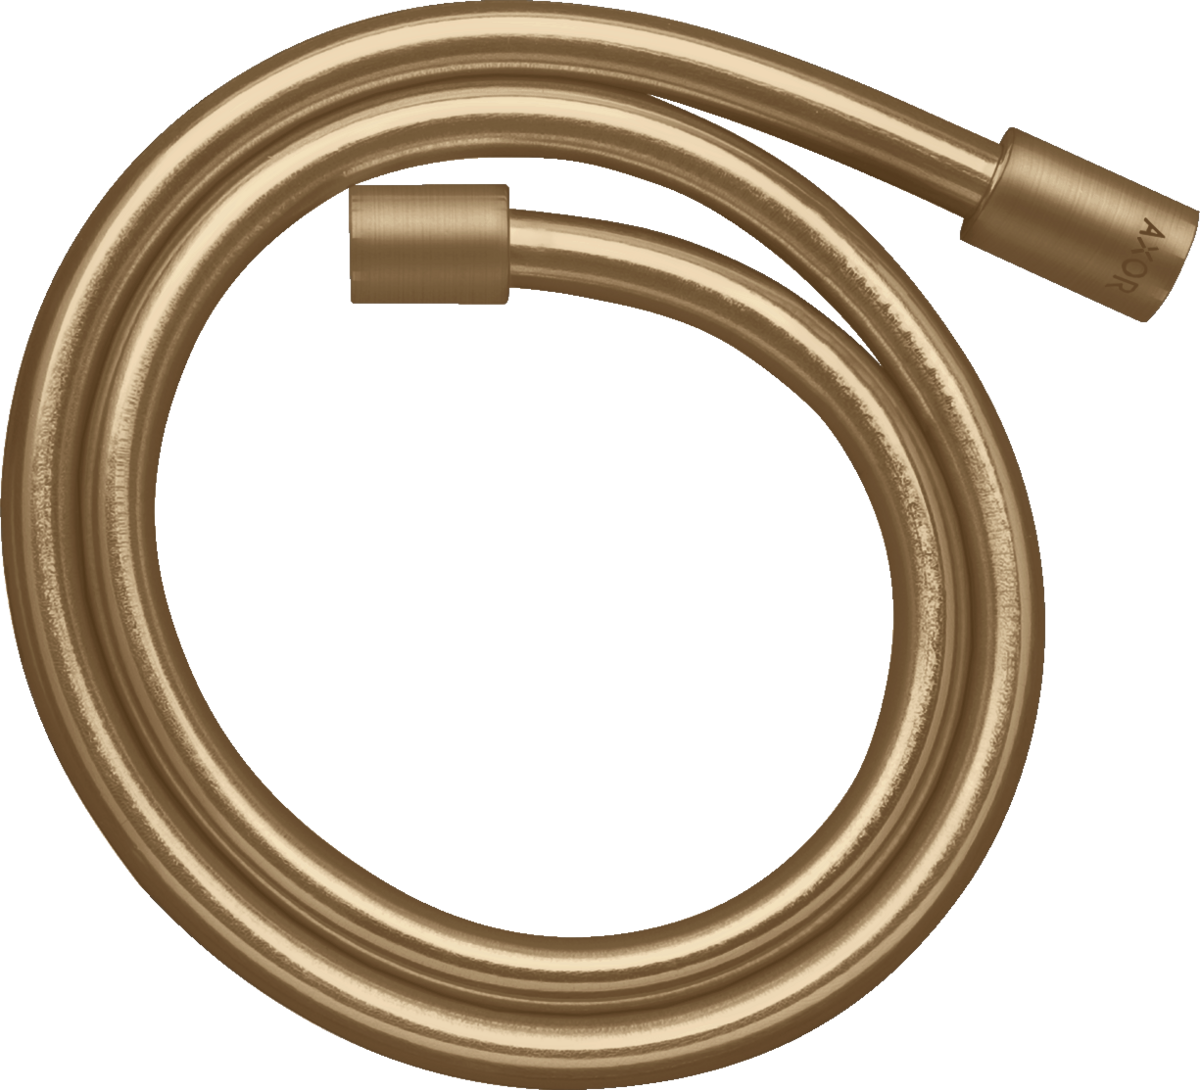 Picture of HANSGROHE AXOR Starck Metal effect shower hose 1.25 m with cylindrical nuts #28282140 - Brushed Bronze